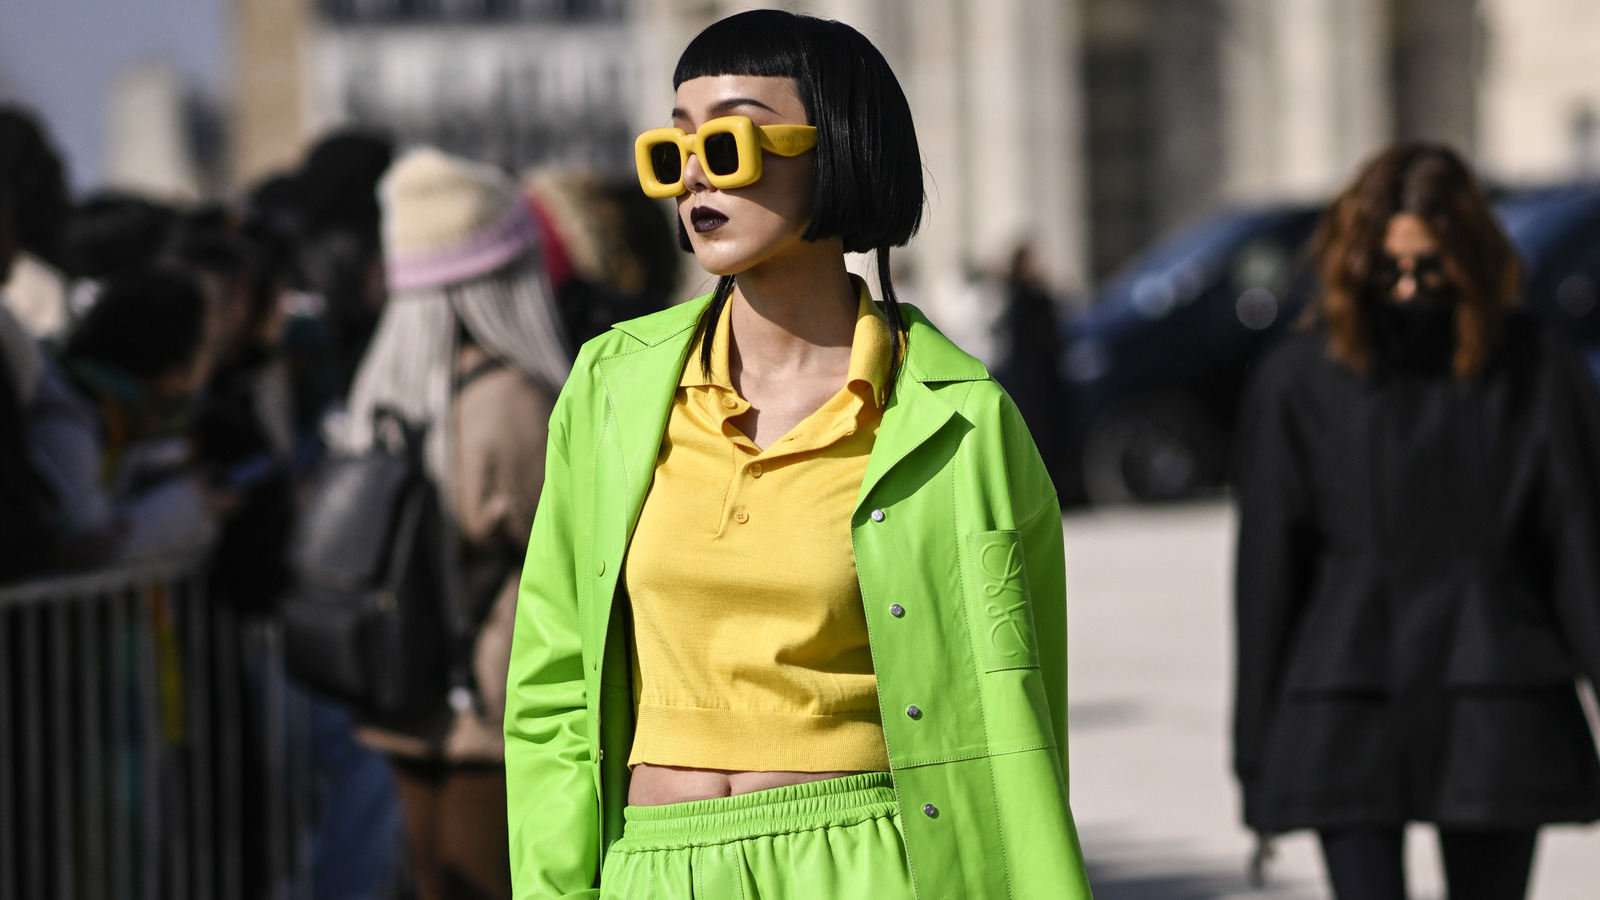 Lime Green Is The Color On Everyone's Mind (And Clothes) This Spring